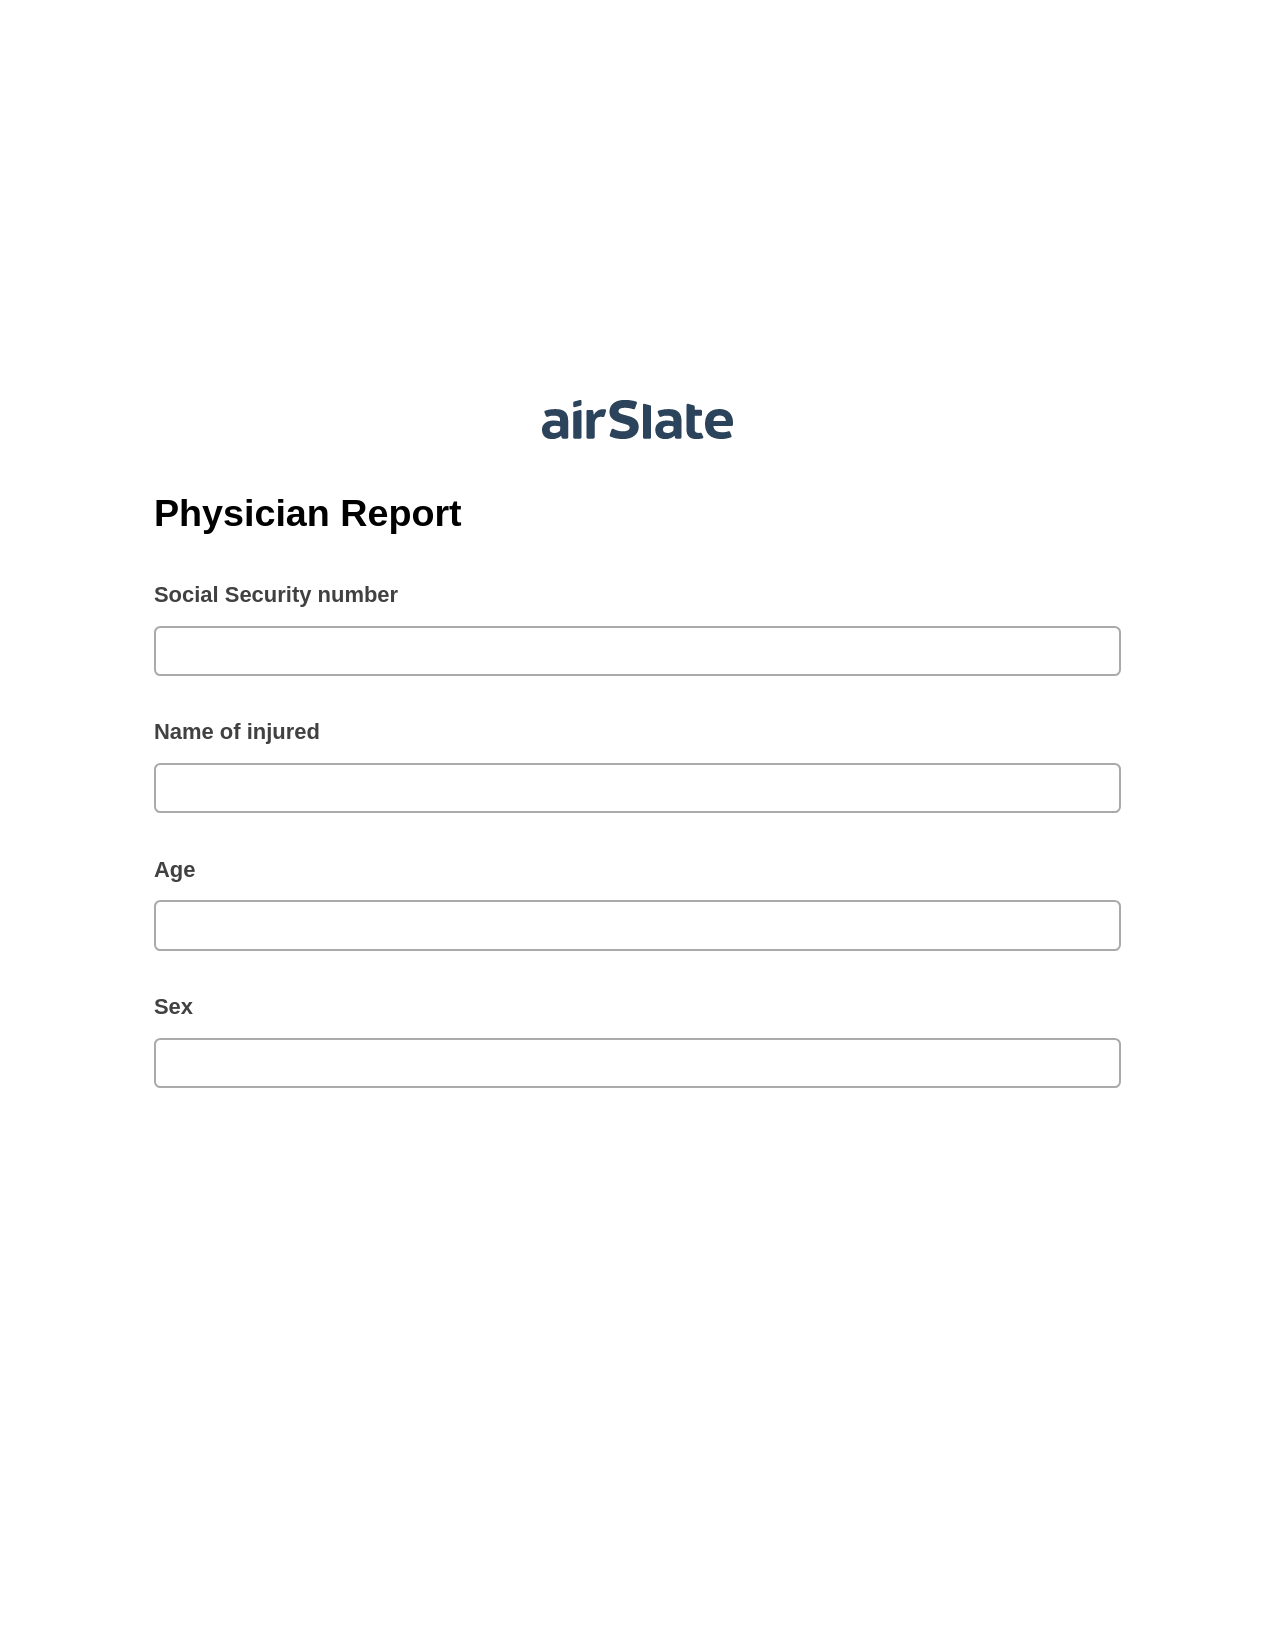 Physician Report Pre-fill from MySQL Bot, Send a Slate to MS Dynamics 365 Contact Bot, Archive to Box Bot